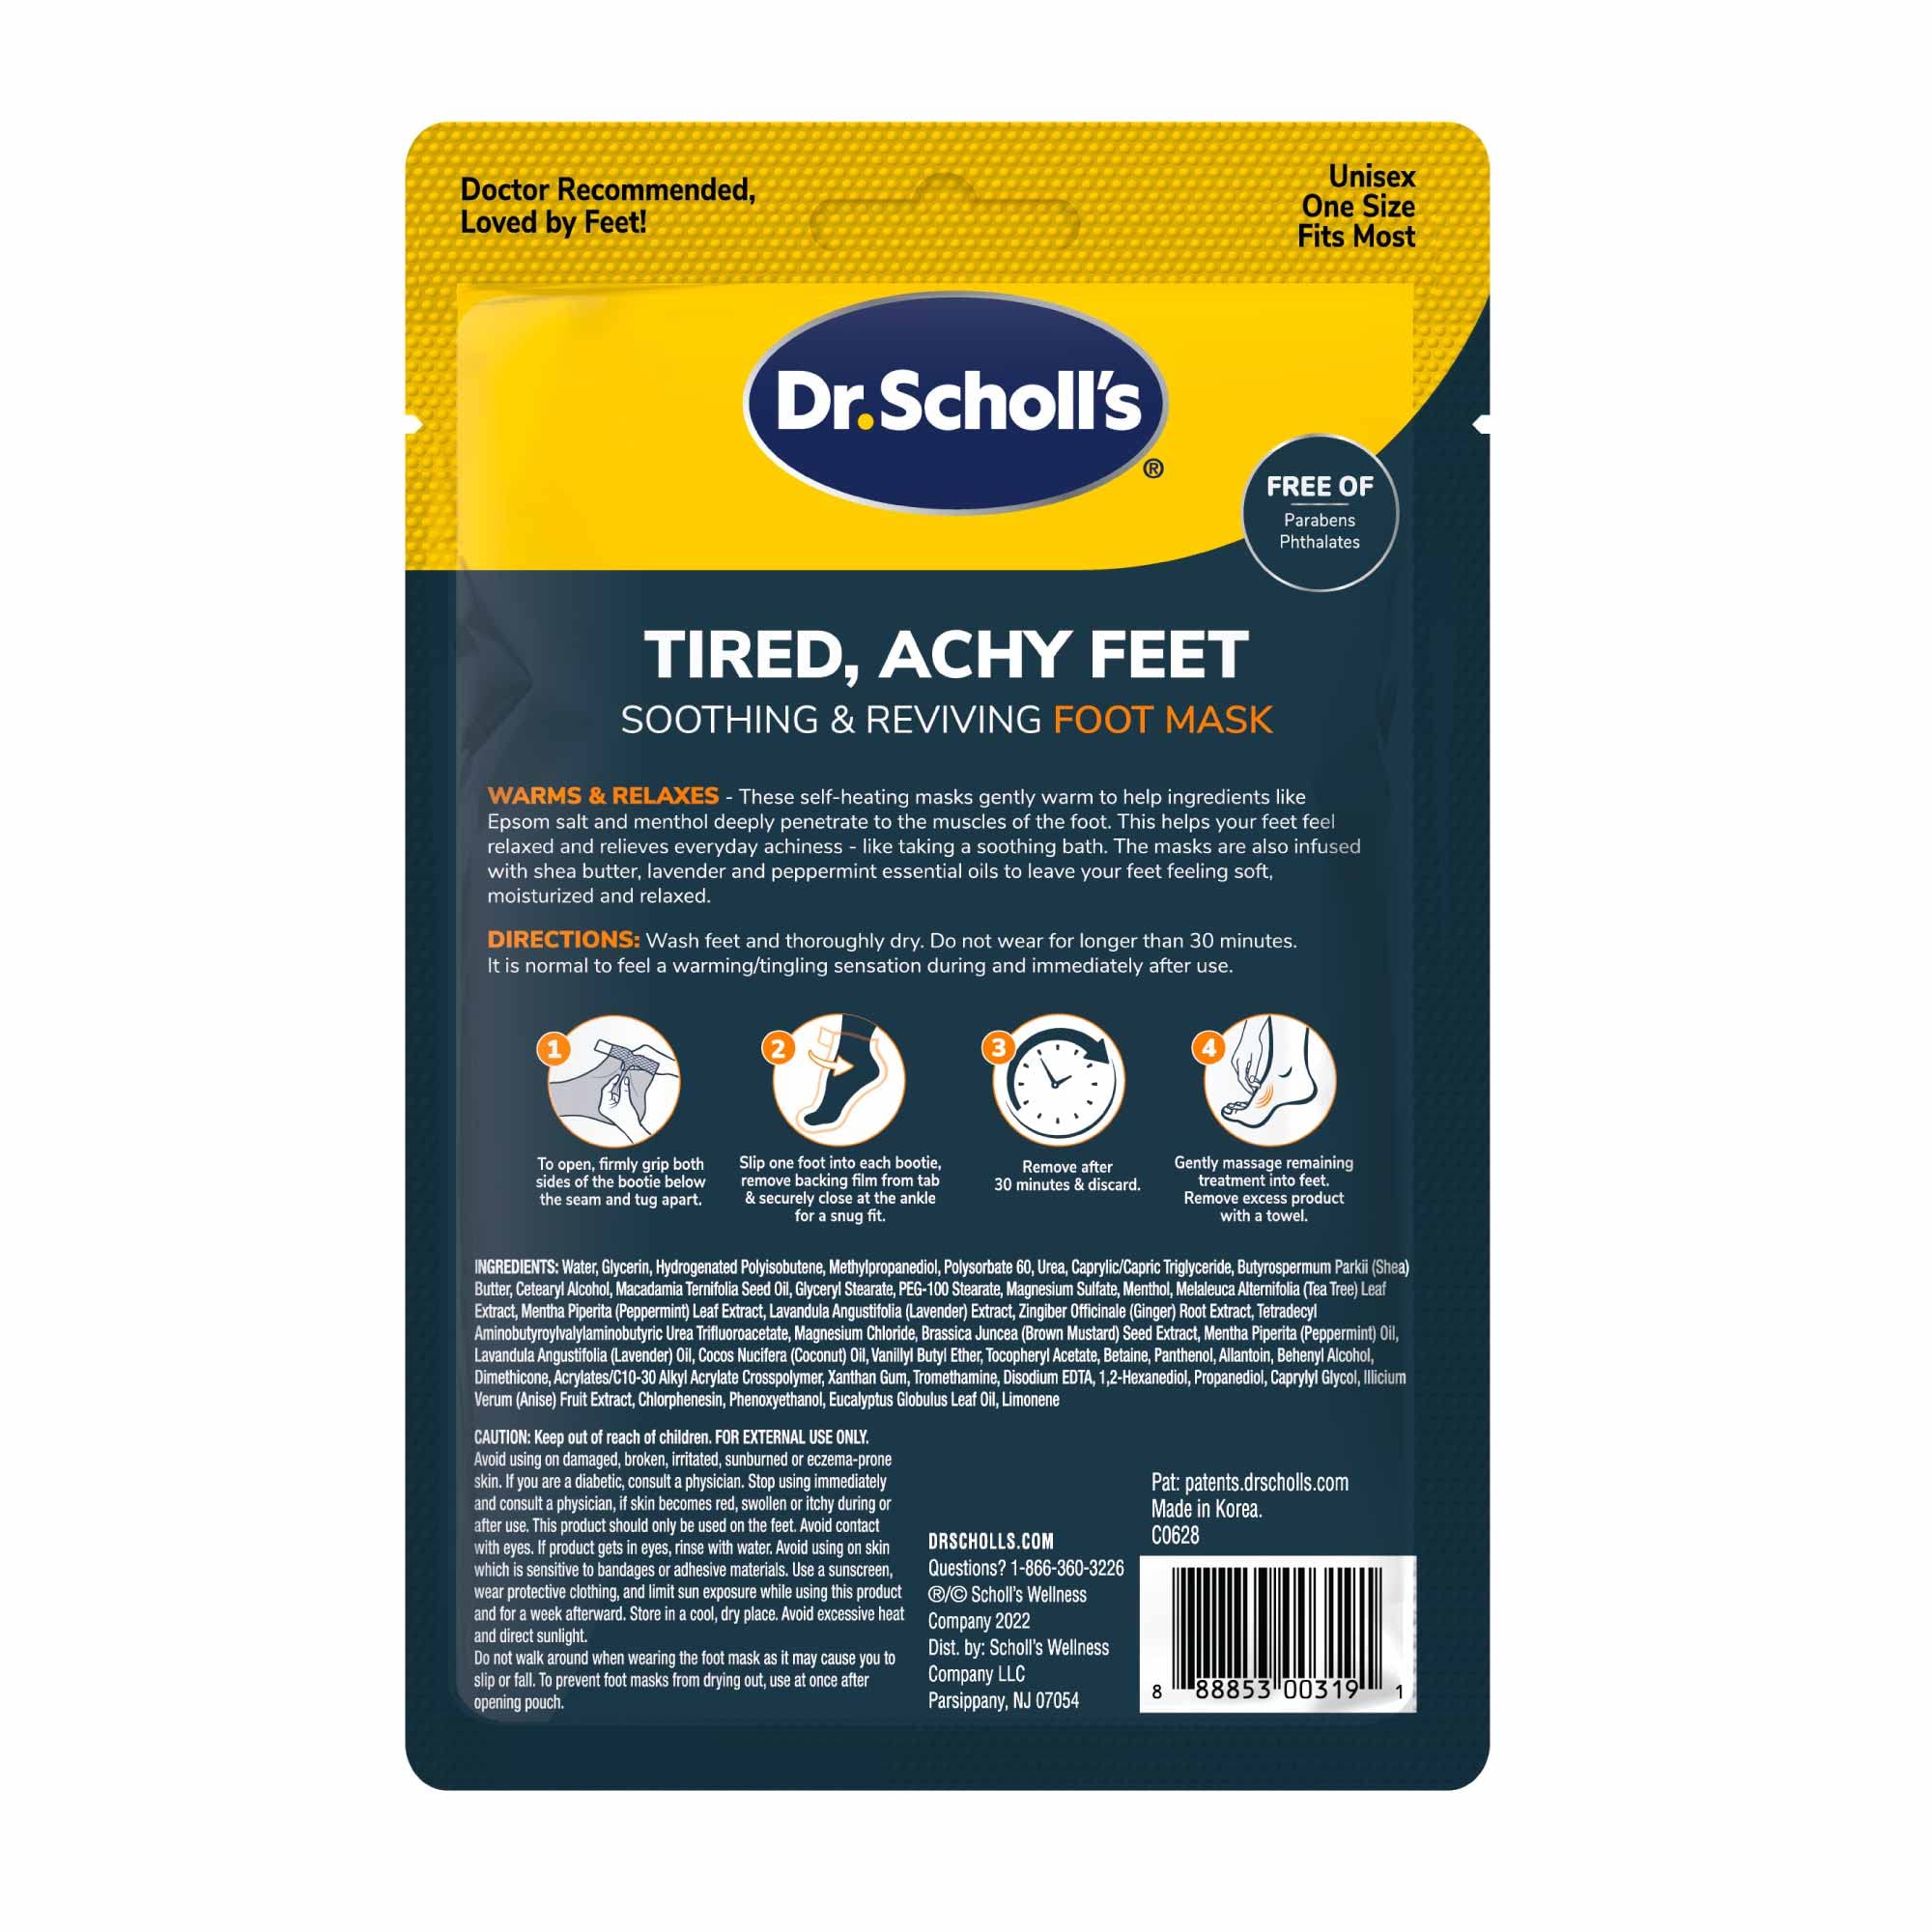 Dr. Scholl's Tired, Achy Feet Soothing & Reviving Foot Mask, Warming Booties, Disposable Socks, Shea Butter Intensely Moisturizes, Epsom Salt & Menthol for Sore Feet, Relieves Sore Muscles, 3 Pair